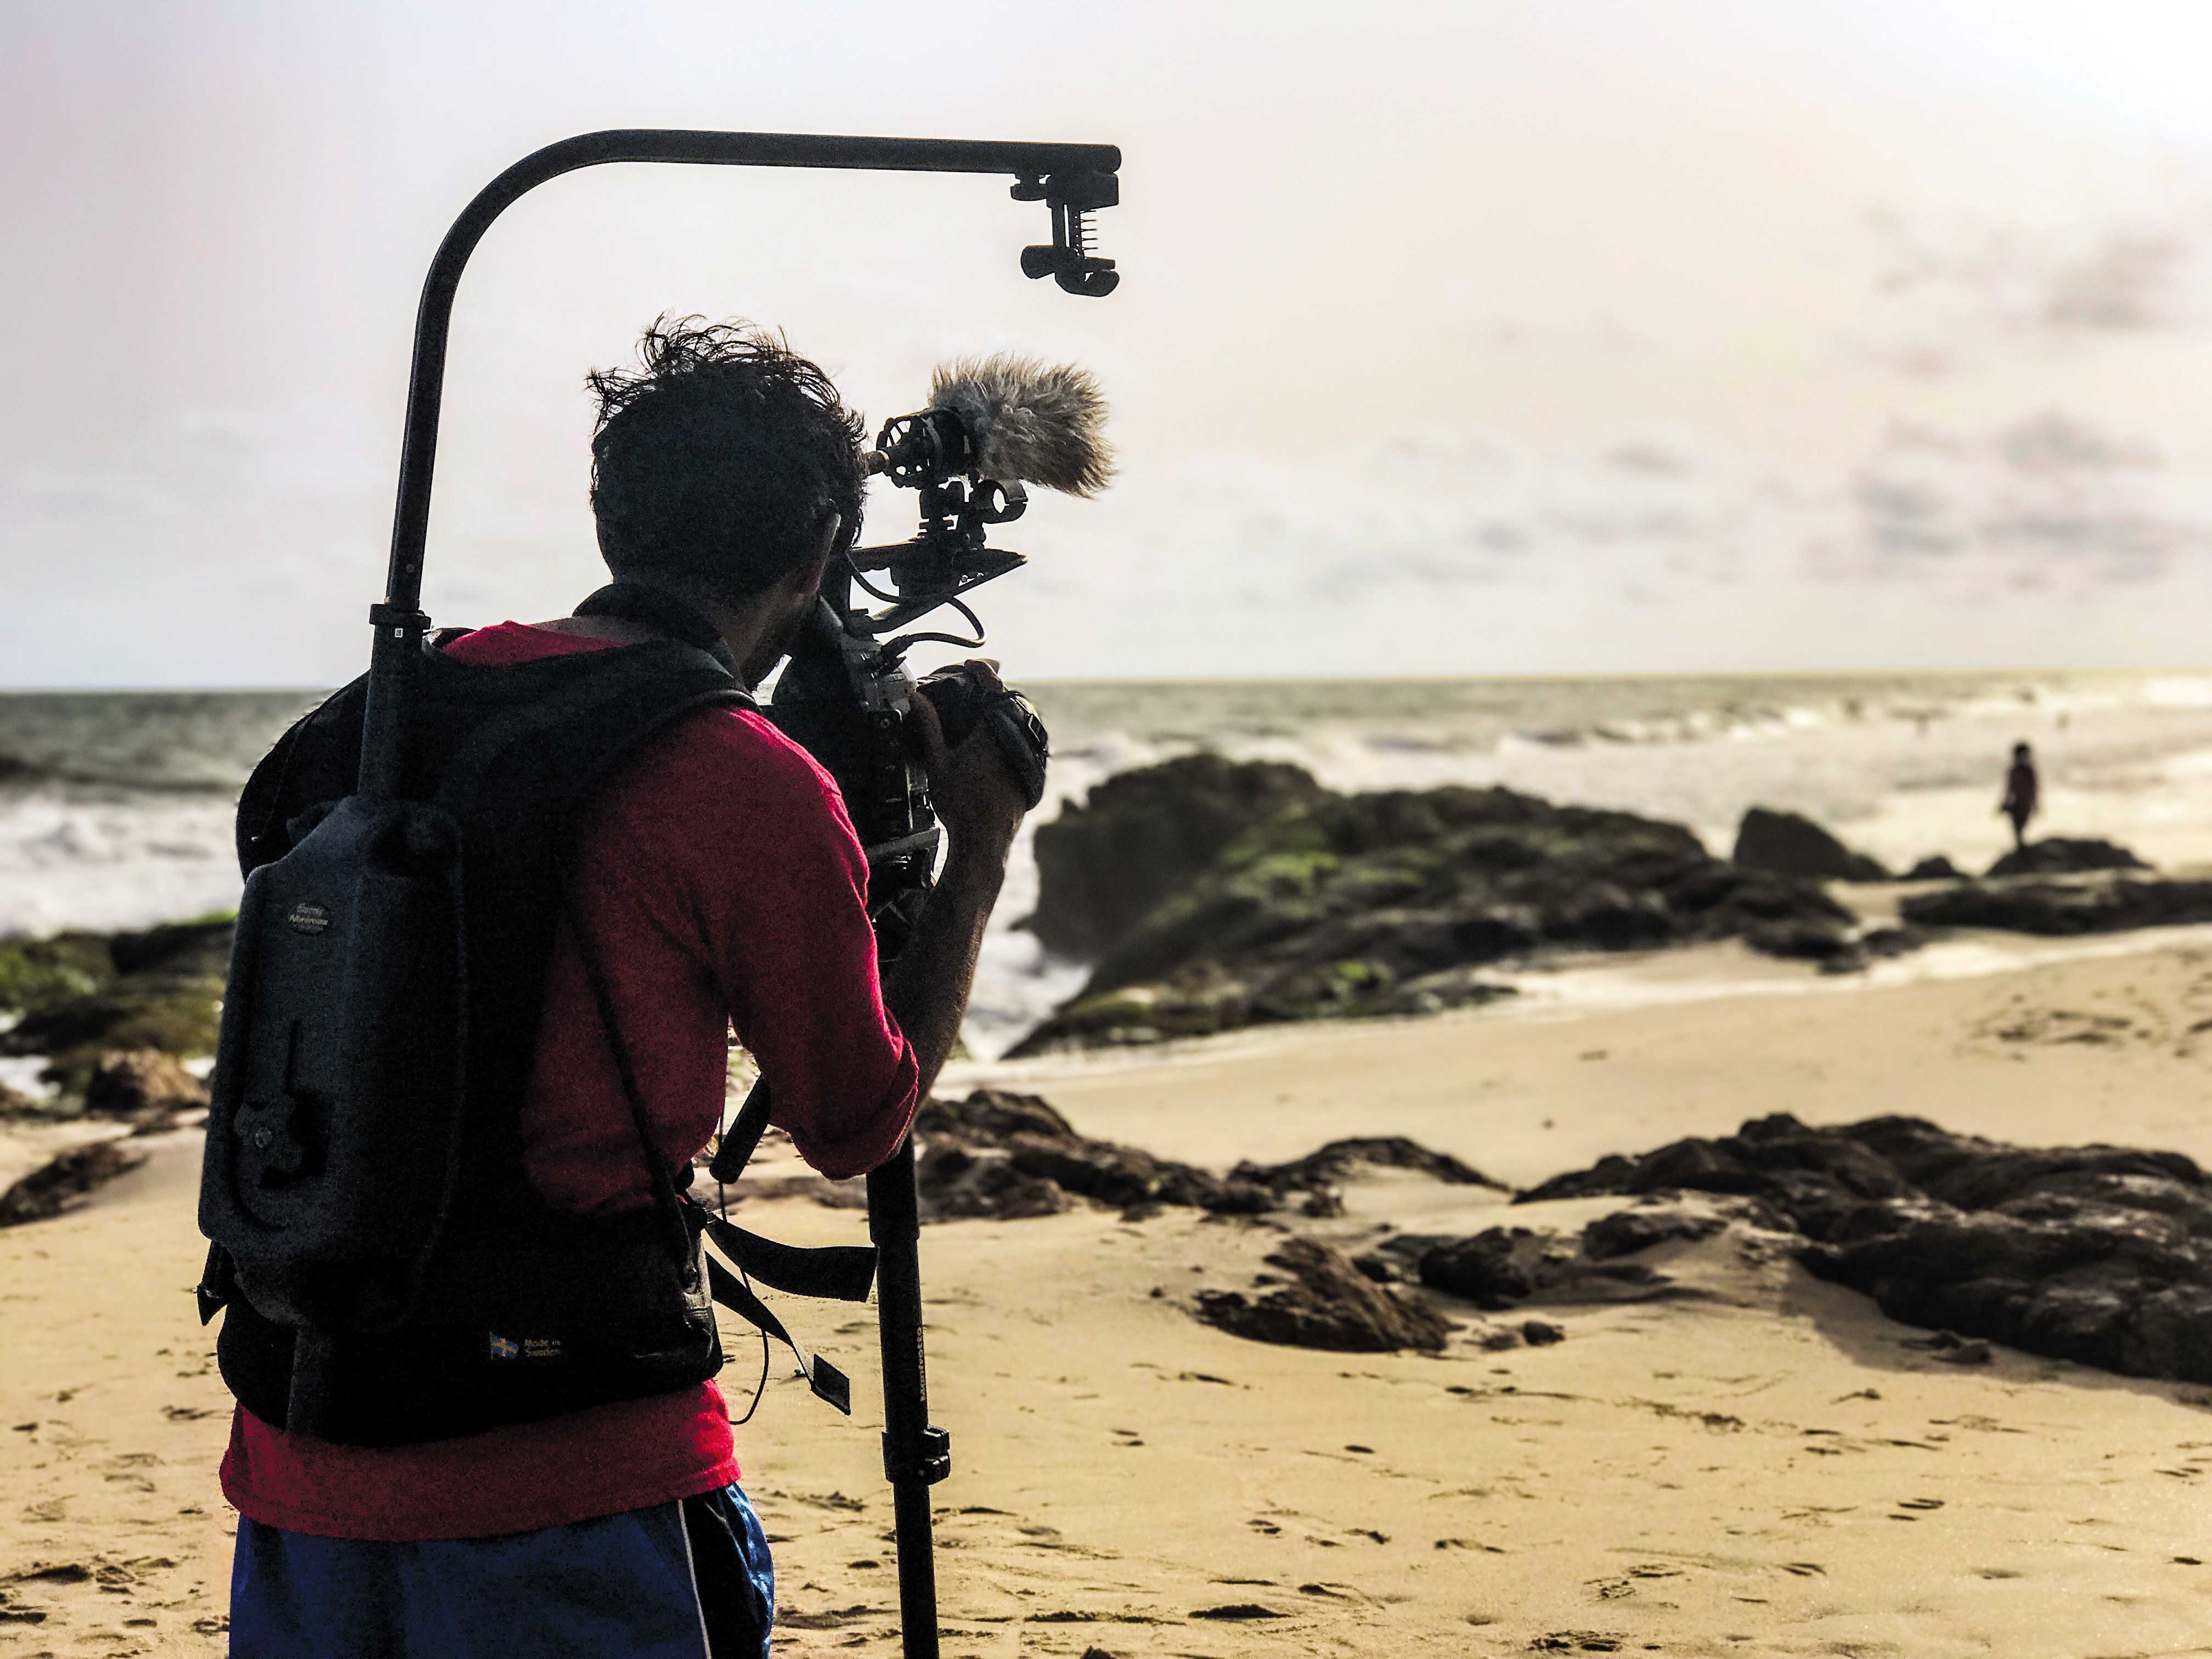 Student filming with camera on beach in Ghana